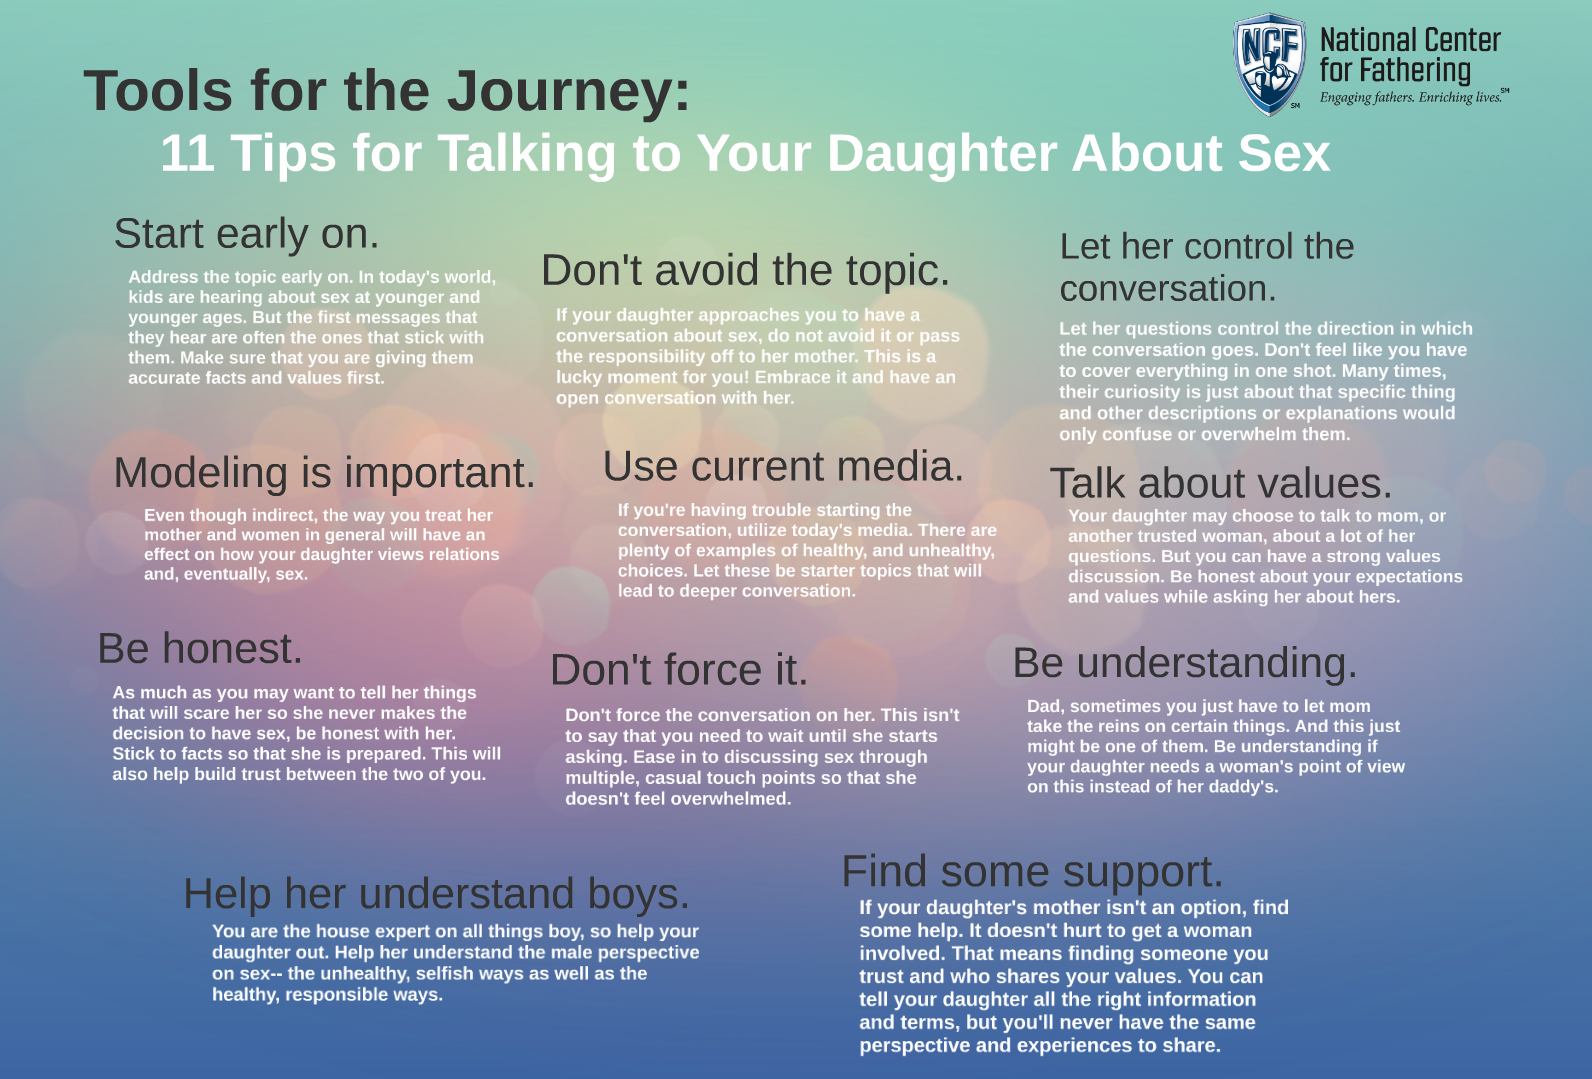 11 Tips for Talking to Your Daughter About